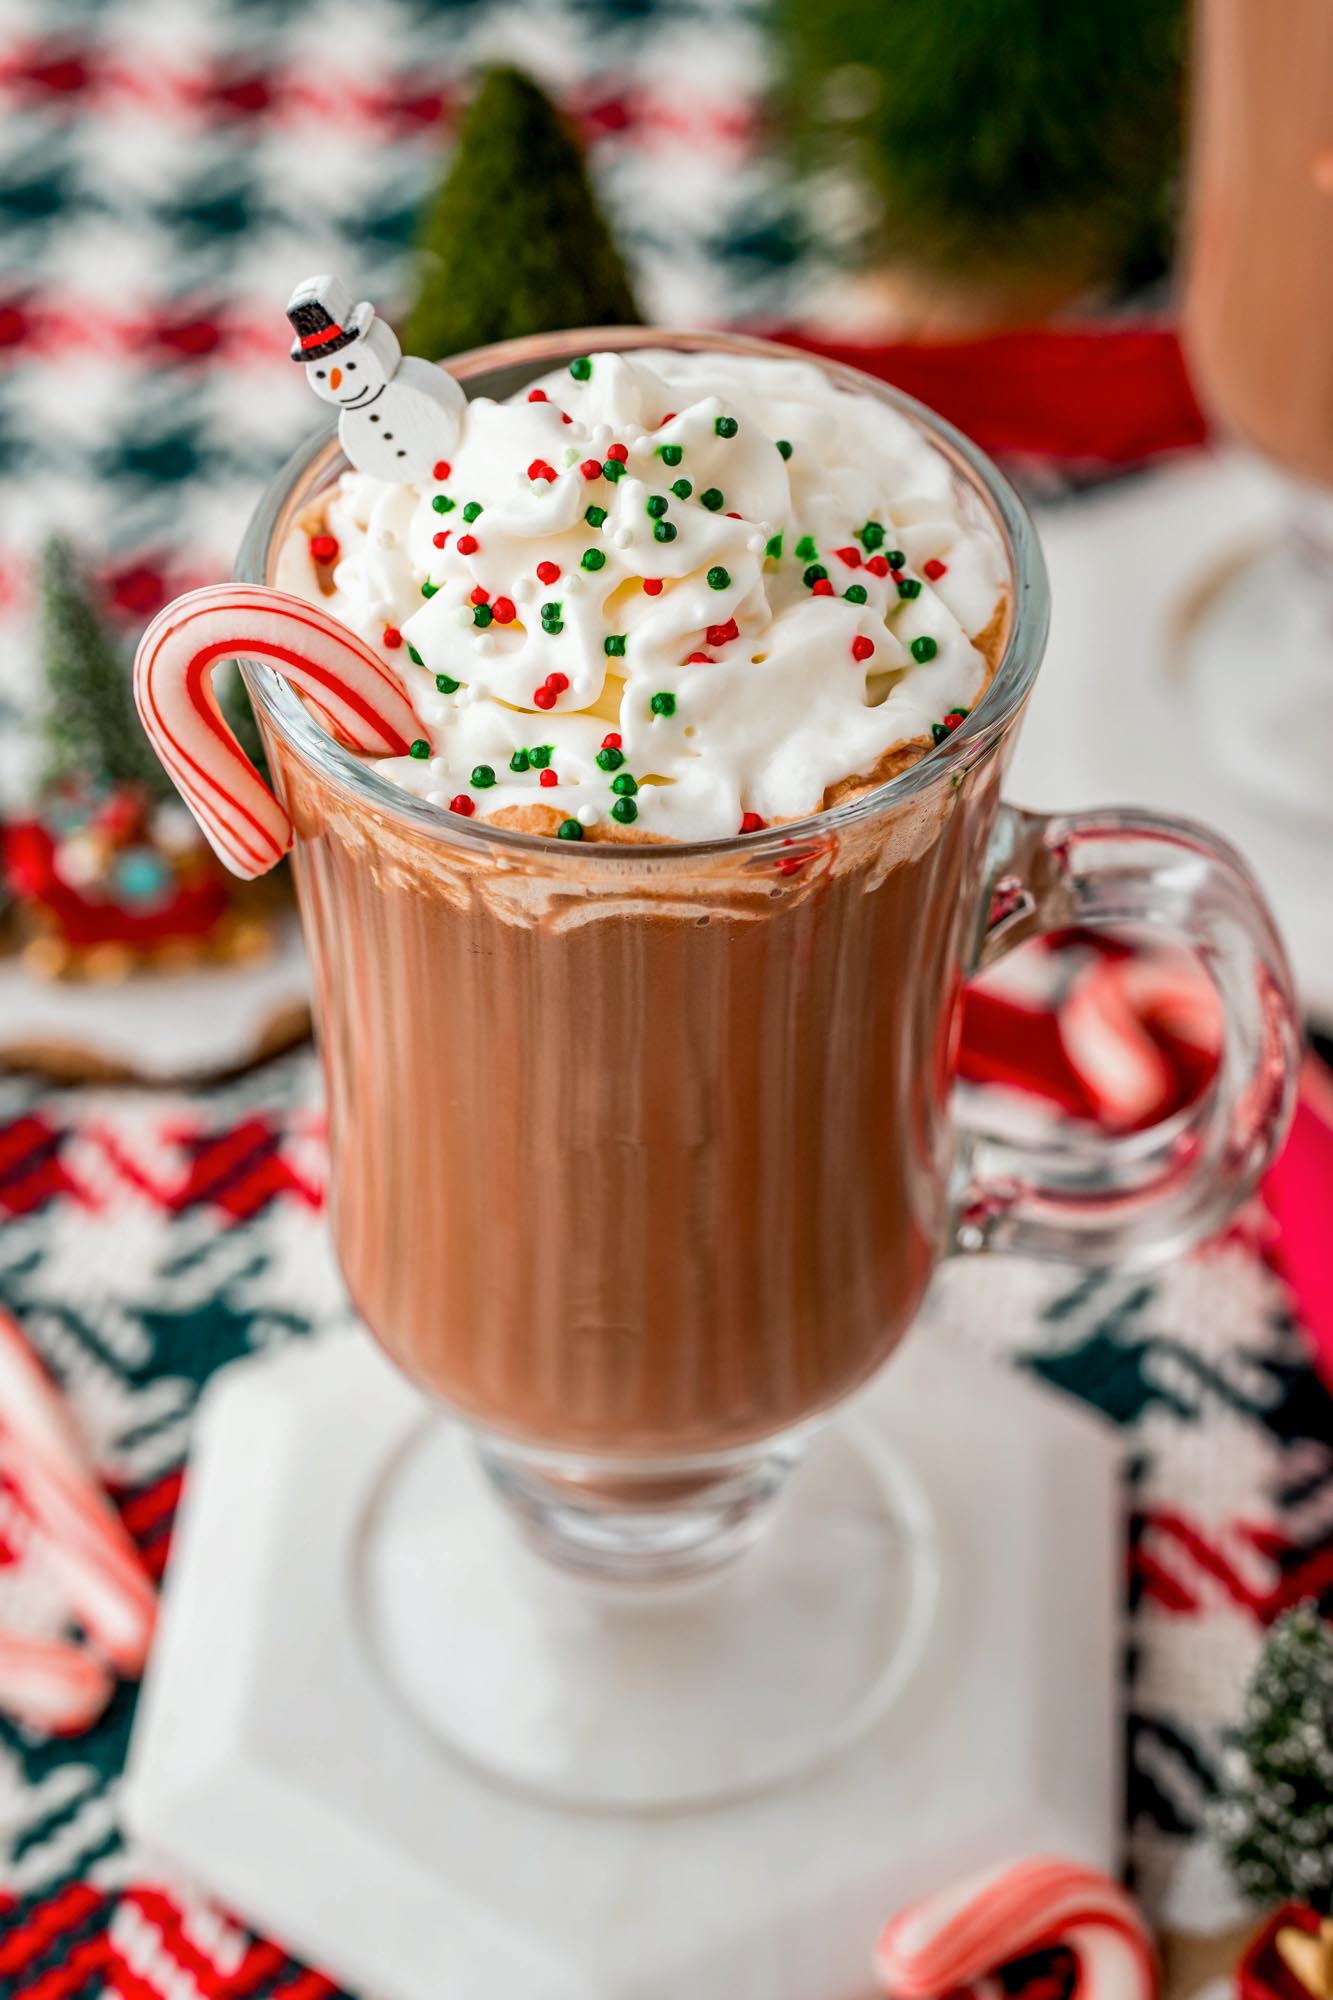 A mug of peppermint hot chocolate with whipped cream and sprinkles